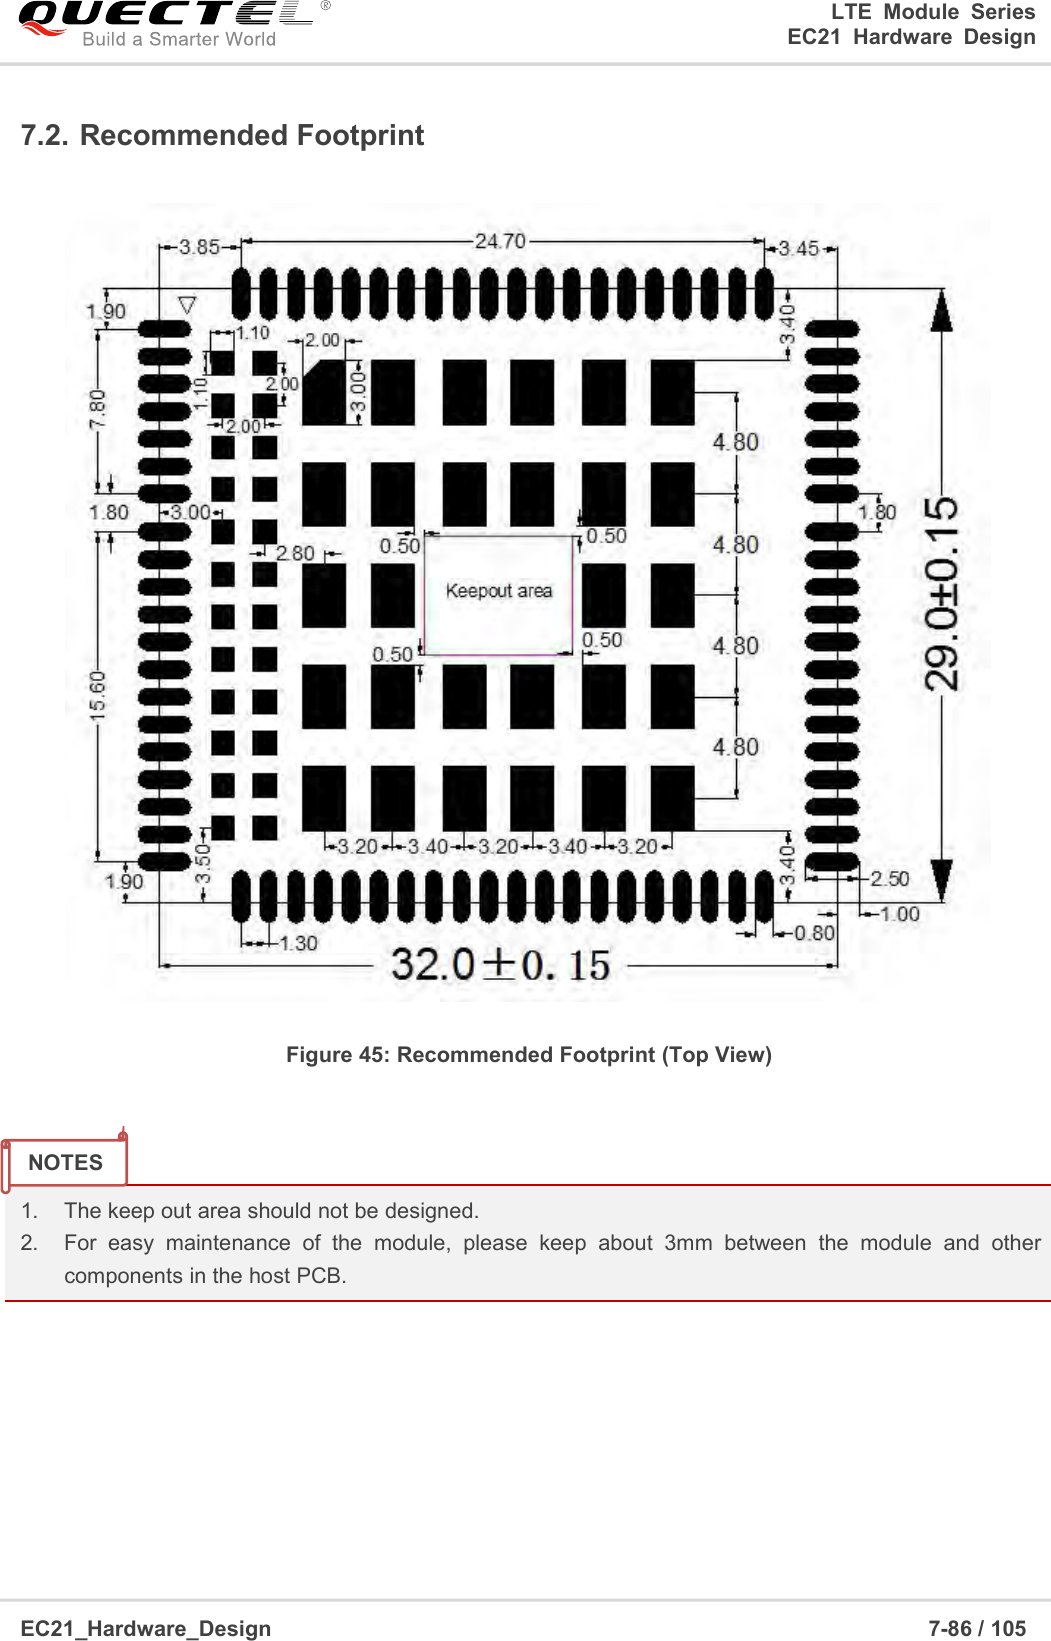 LTE Module SeriesEC21 Hardware DesignEC21_Hardware_Design 7-86 / 1057.2. Recommended FootprintFigure 45: Recommended Footprint (Top View)1. The keep out area should not be designed.2. For easy maintenance of the module, please keep about 3mm between the module and othercomponents in the host PCB.NOTES